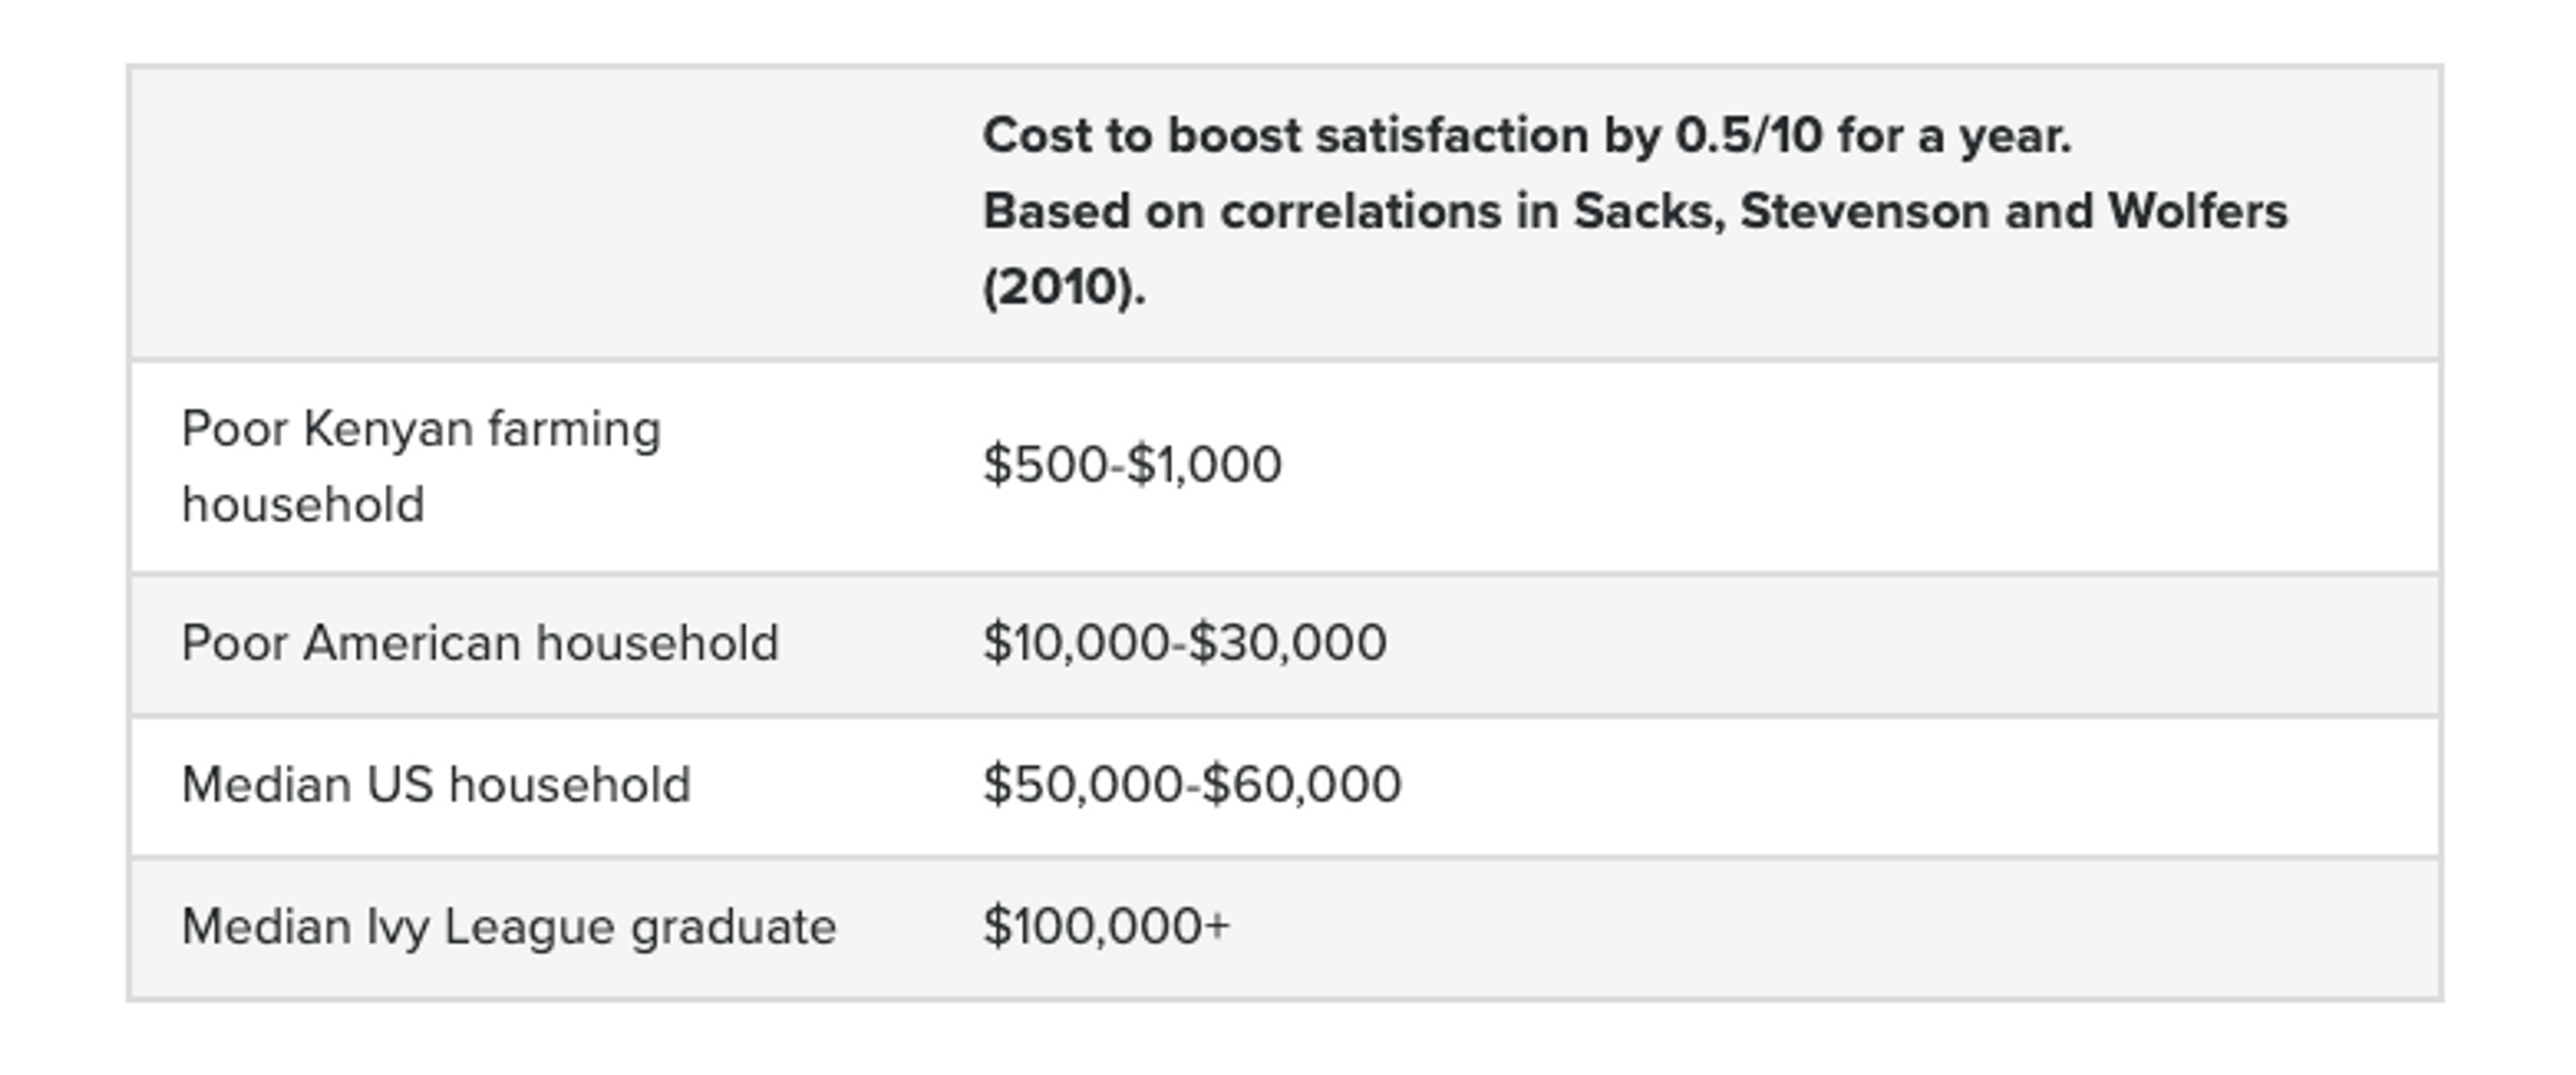 Table of cost to boost satisfaction in the U.S. vs overseas